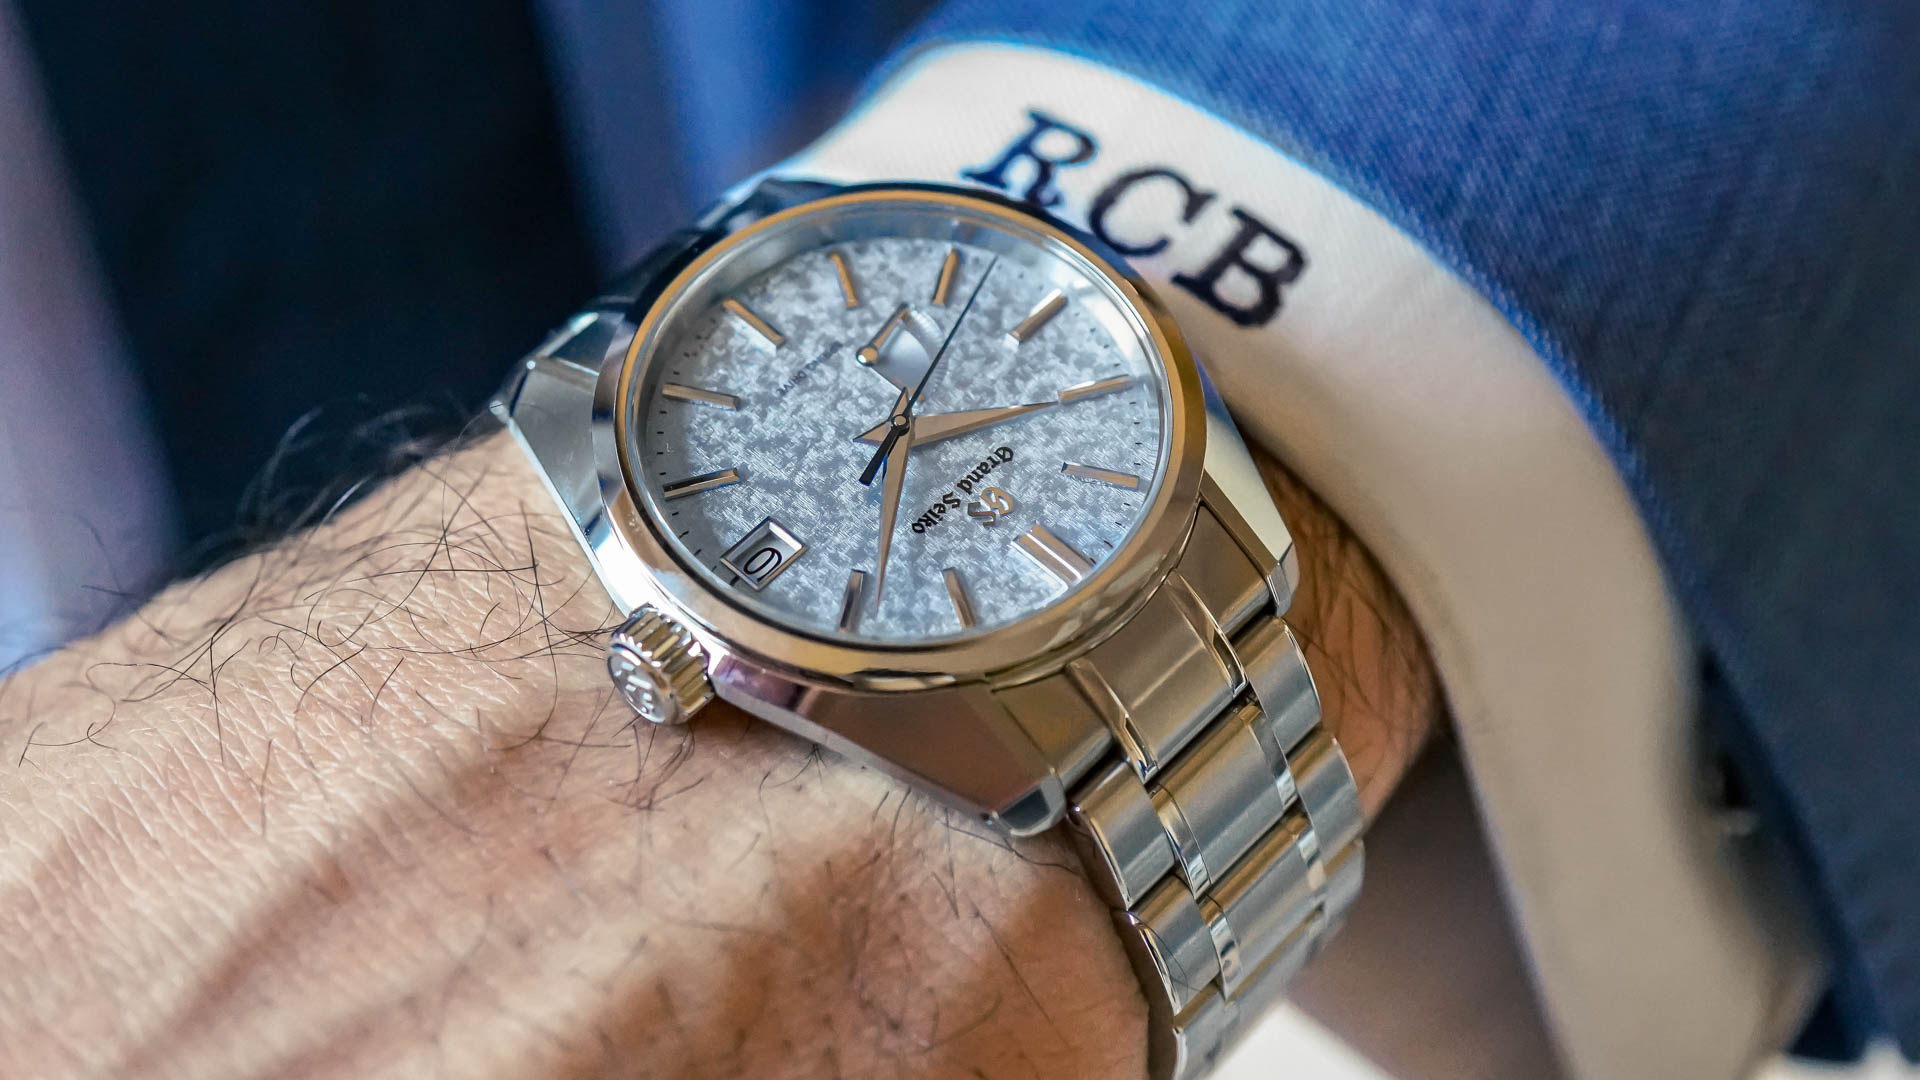 A Guide To Metals & Some Of Our Top Most Durable Watches | aBlogtoWatch